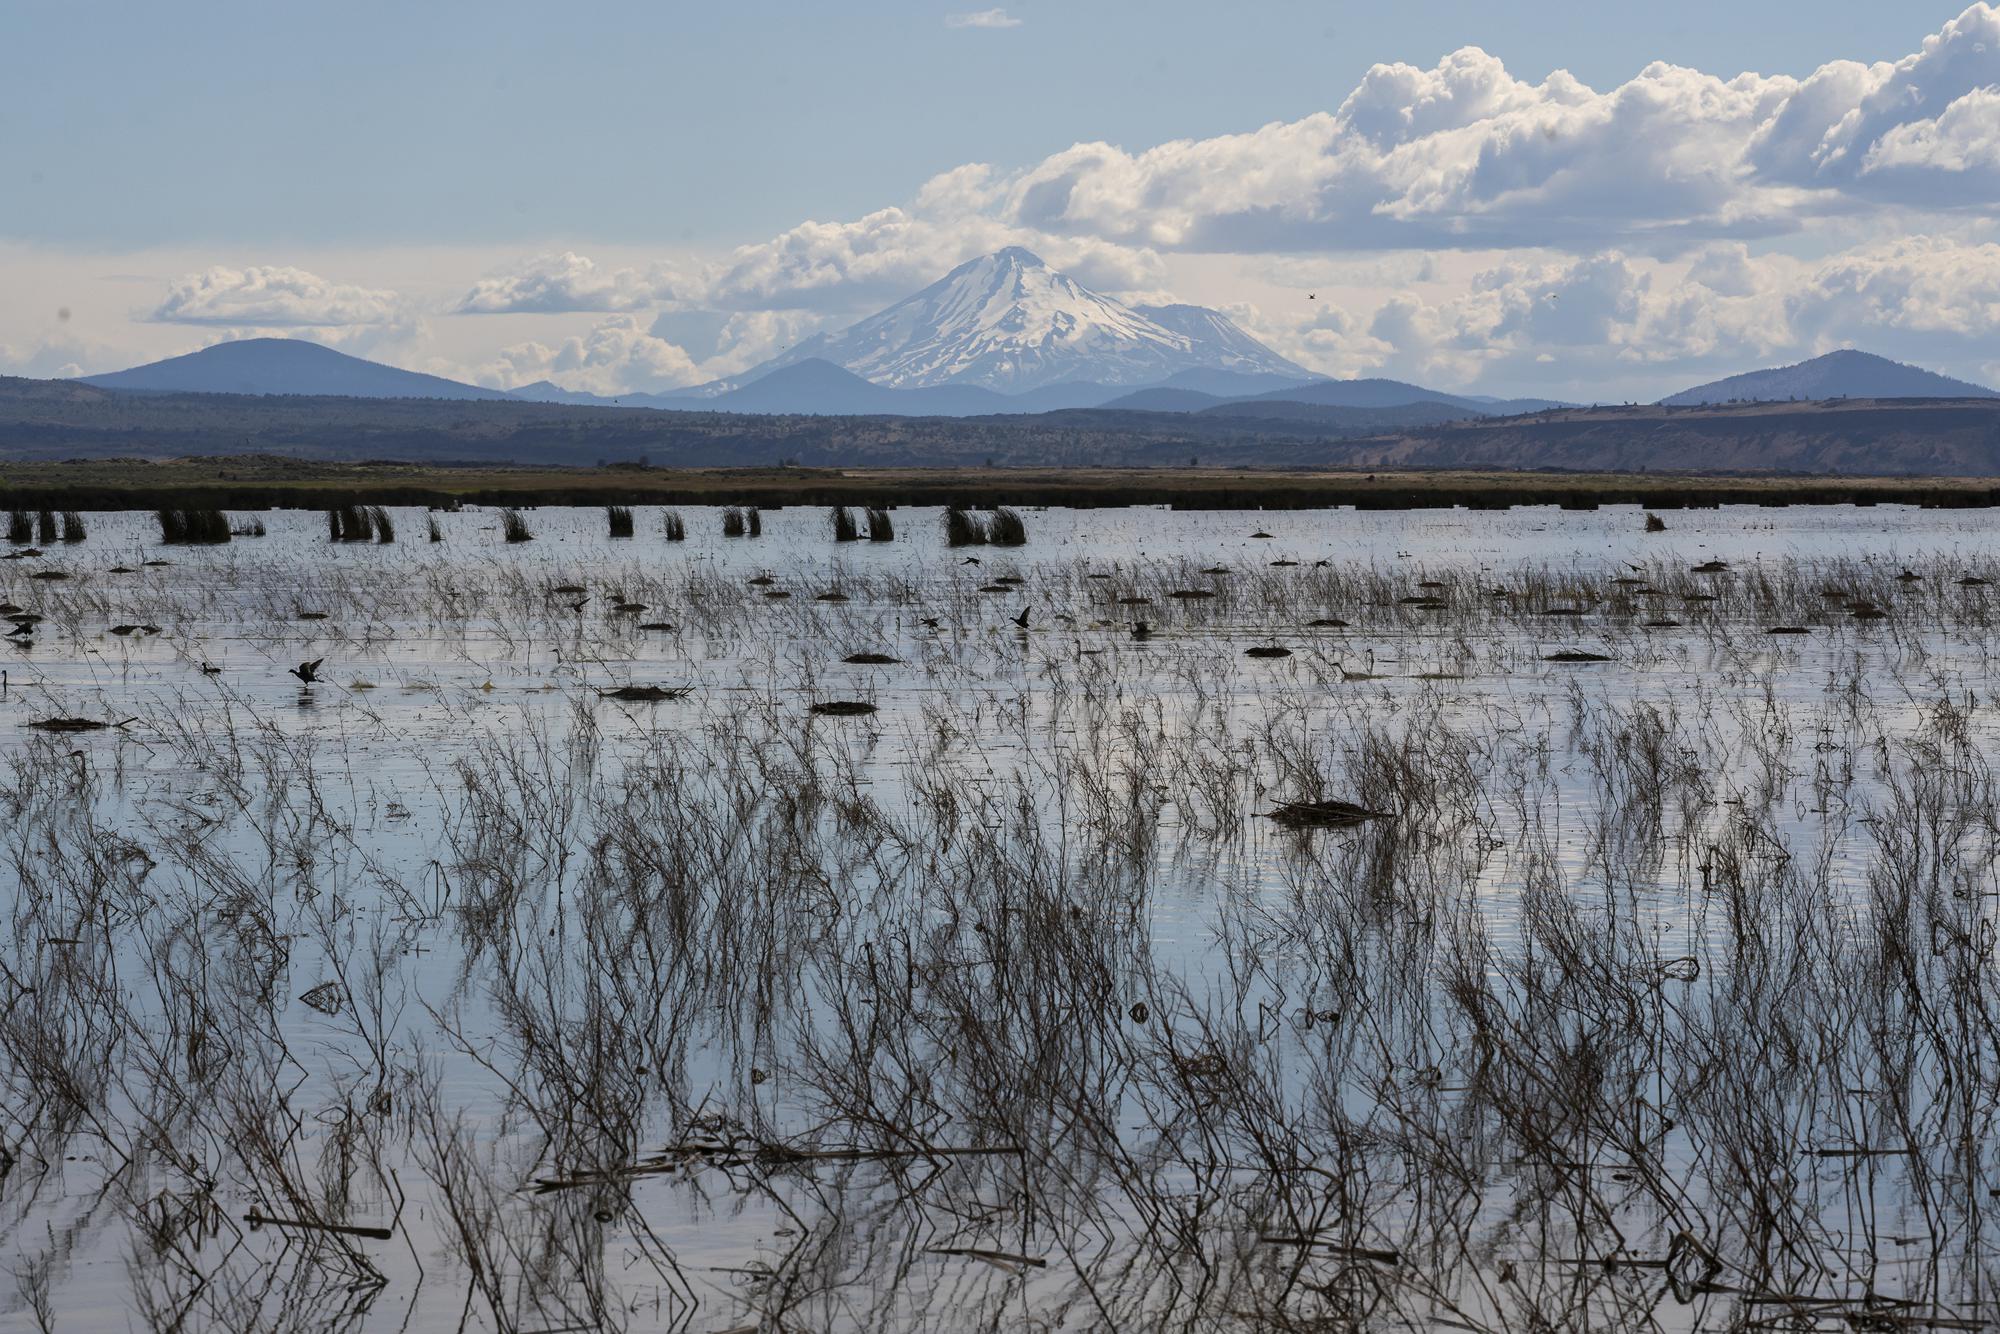 Birds and other wildlife move through a wetland in the Klamath River Basin on Wednesday, June 9, 2021, in Tulelake, Calif. Extreme drought is tearing apart communities in the massive basin, which spans the Oregon-California border. (AP Photo/Nathan Howard)